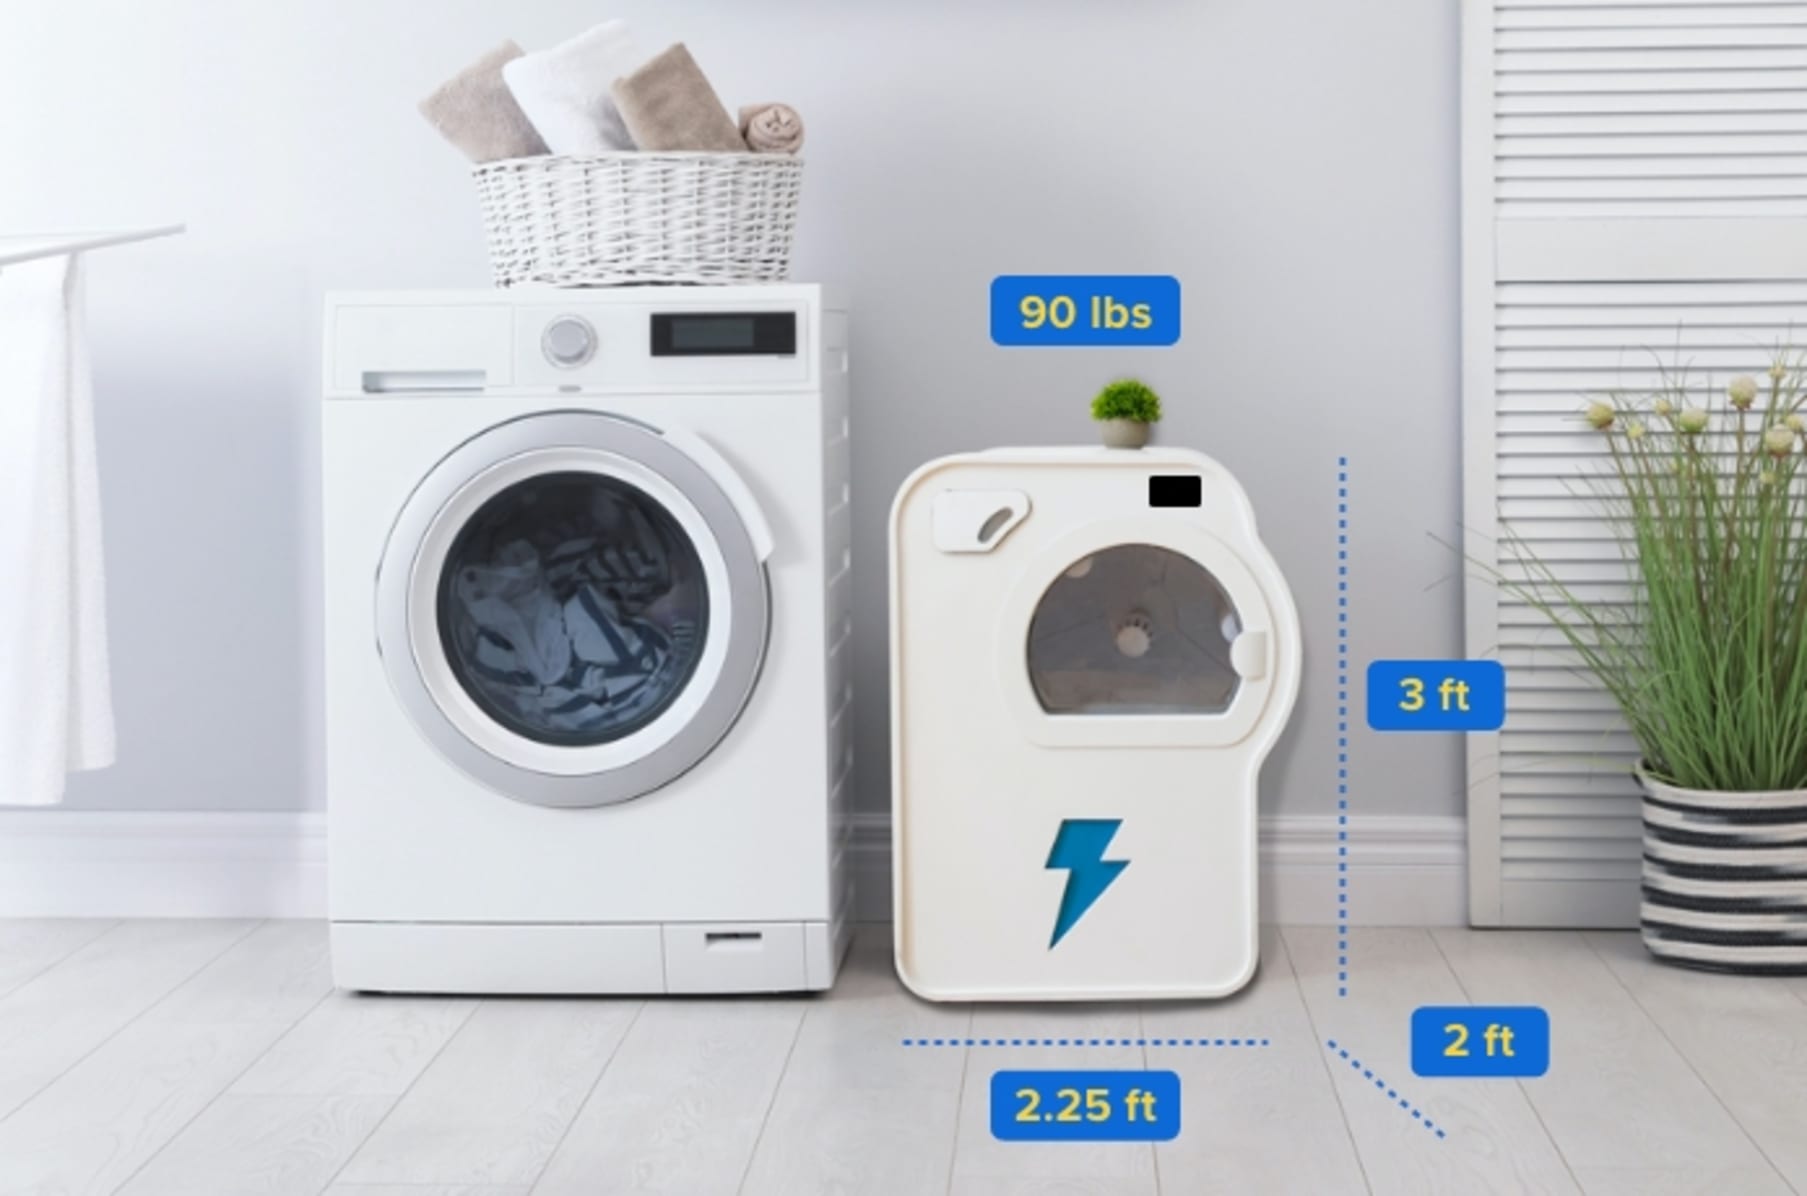 Clothes Dryer Portable Travel Mini Dryer Machine,Folding Household Mini Dryer  for Apartments,New Generation Electric Clothes Drying,Dryer Free  Installation